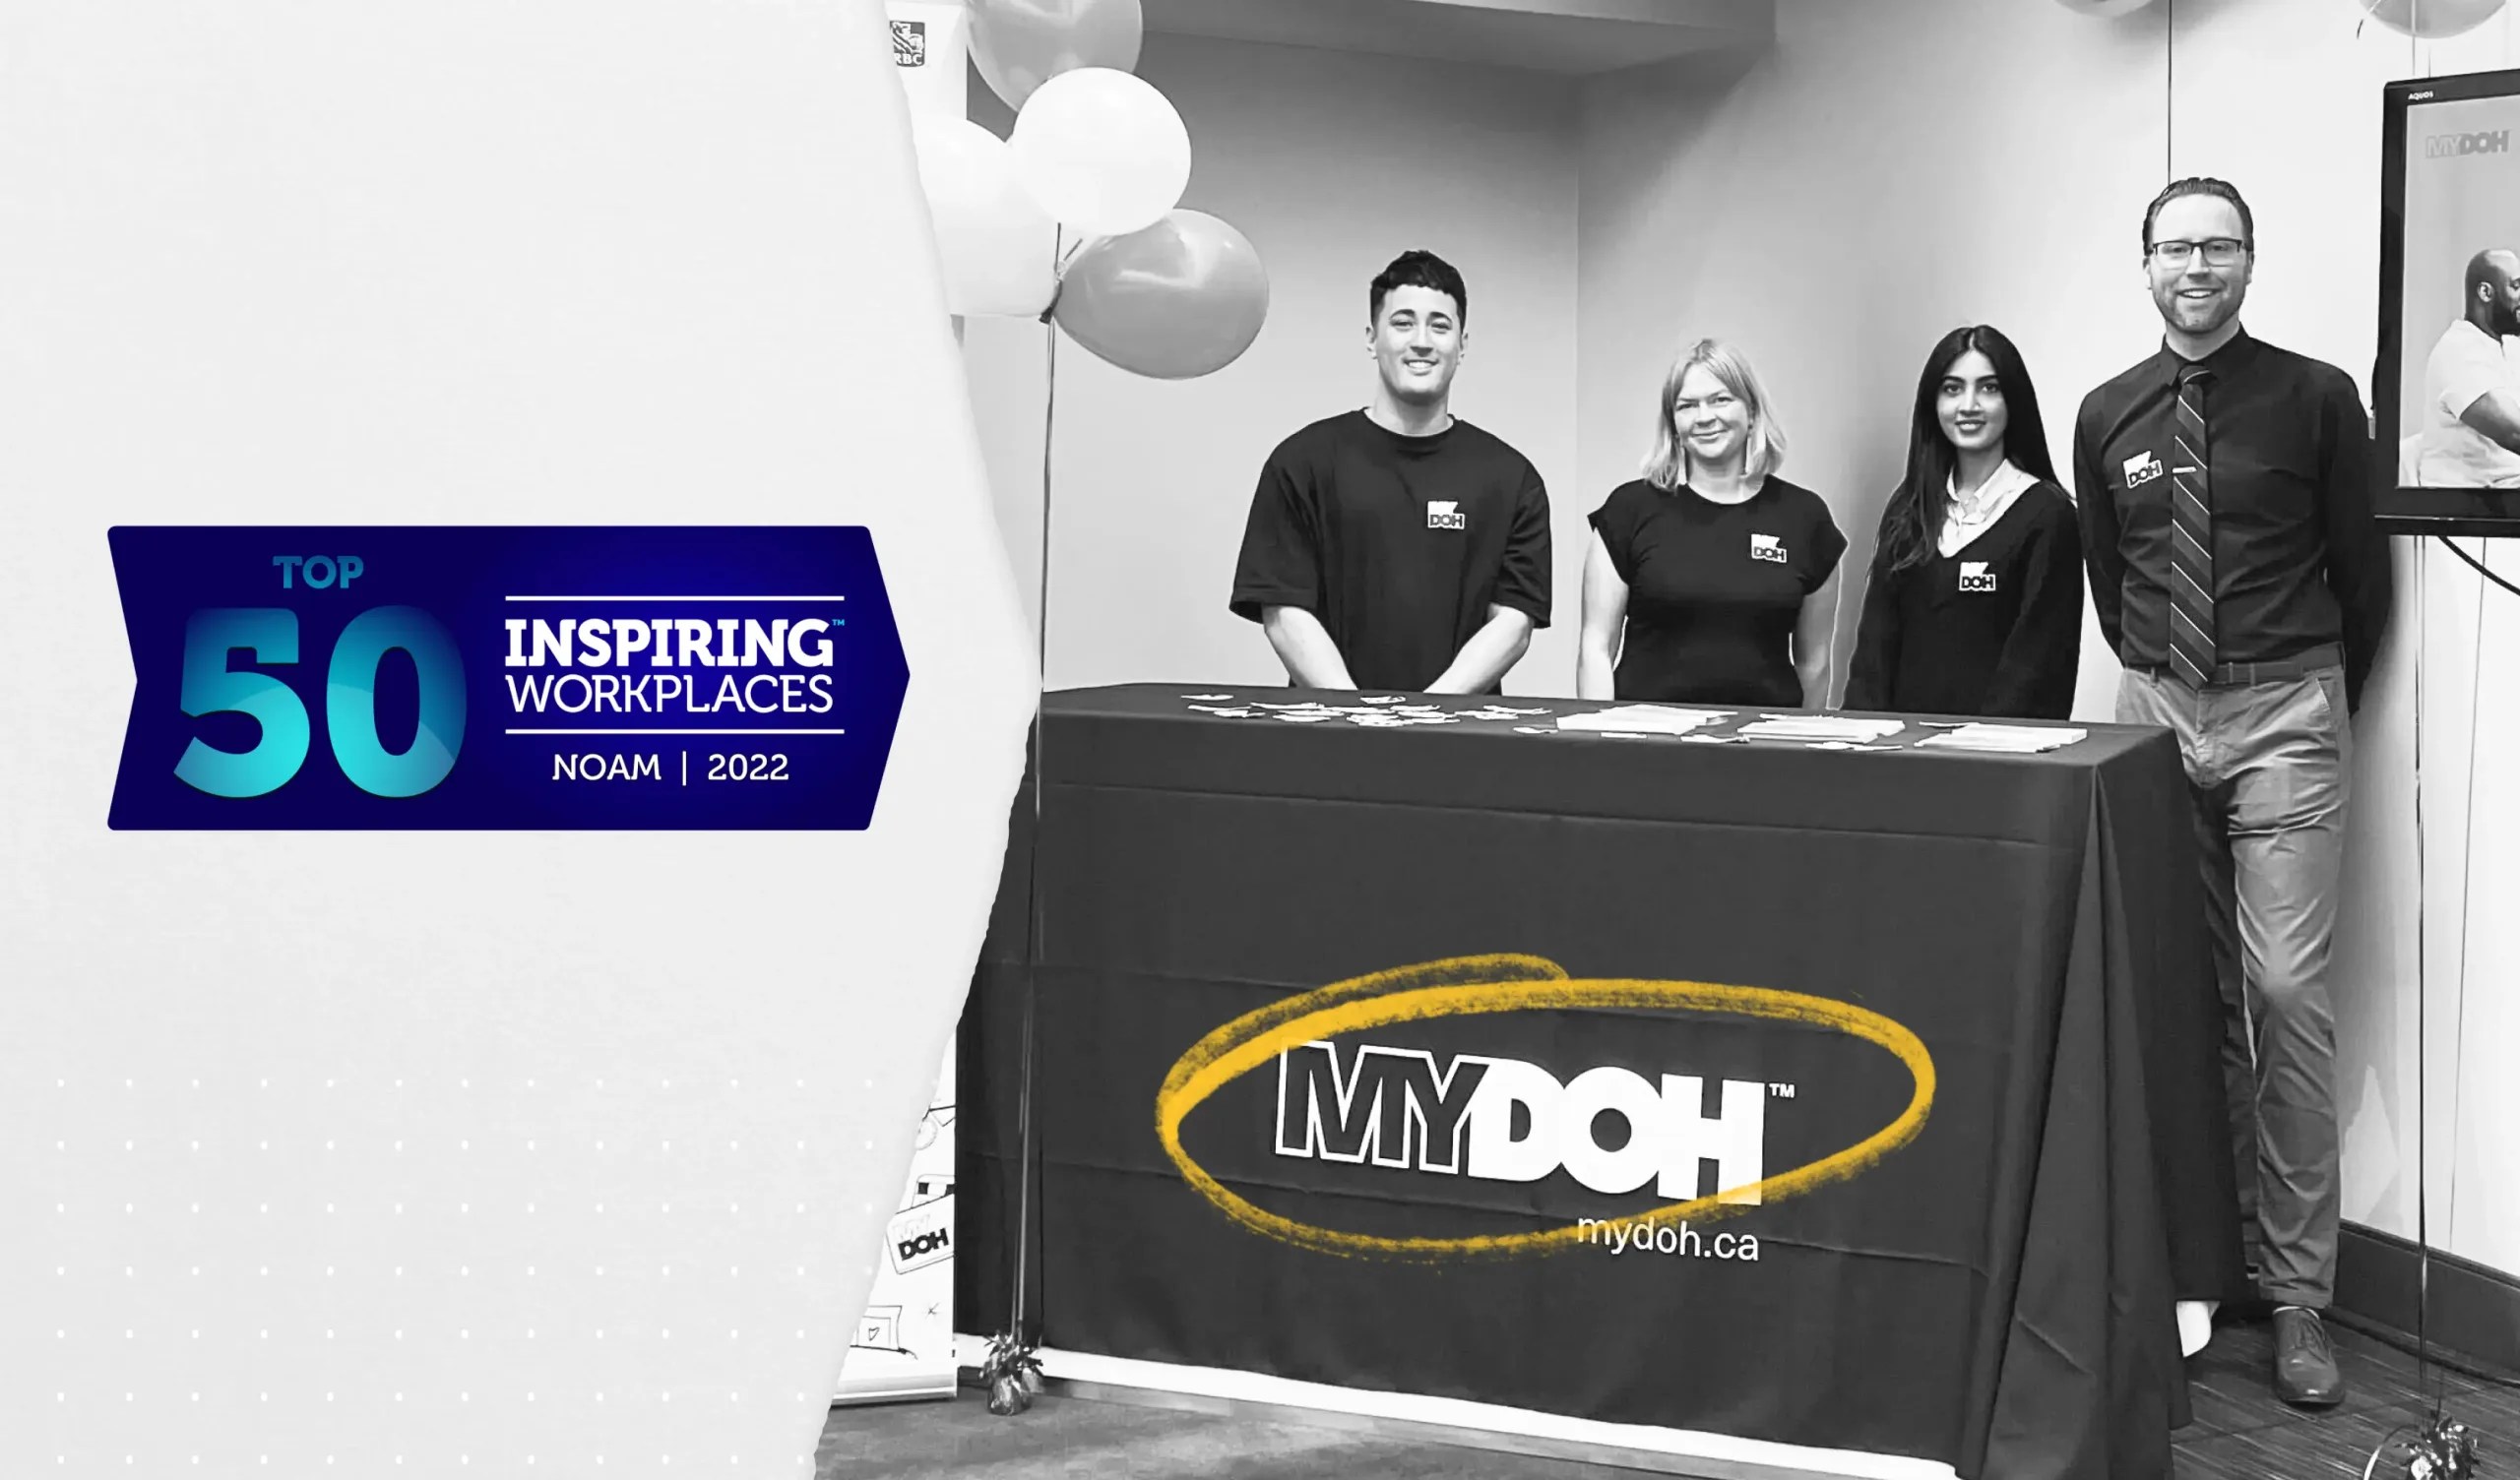 Mydoh Ranked One of the Top Inspiring Workplaces in North America